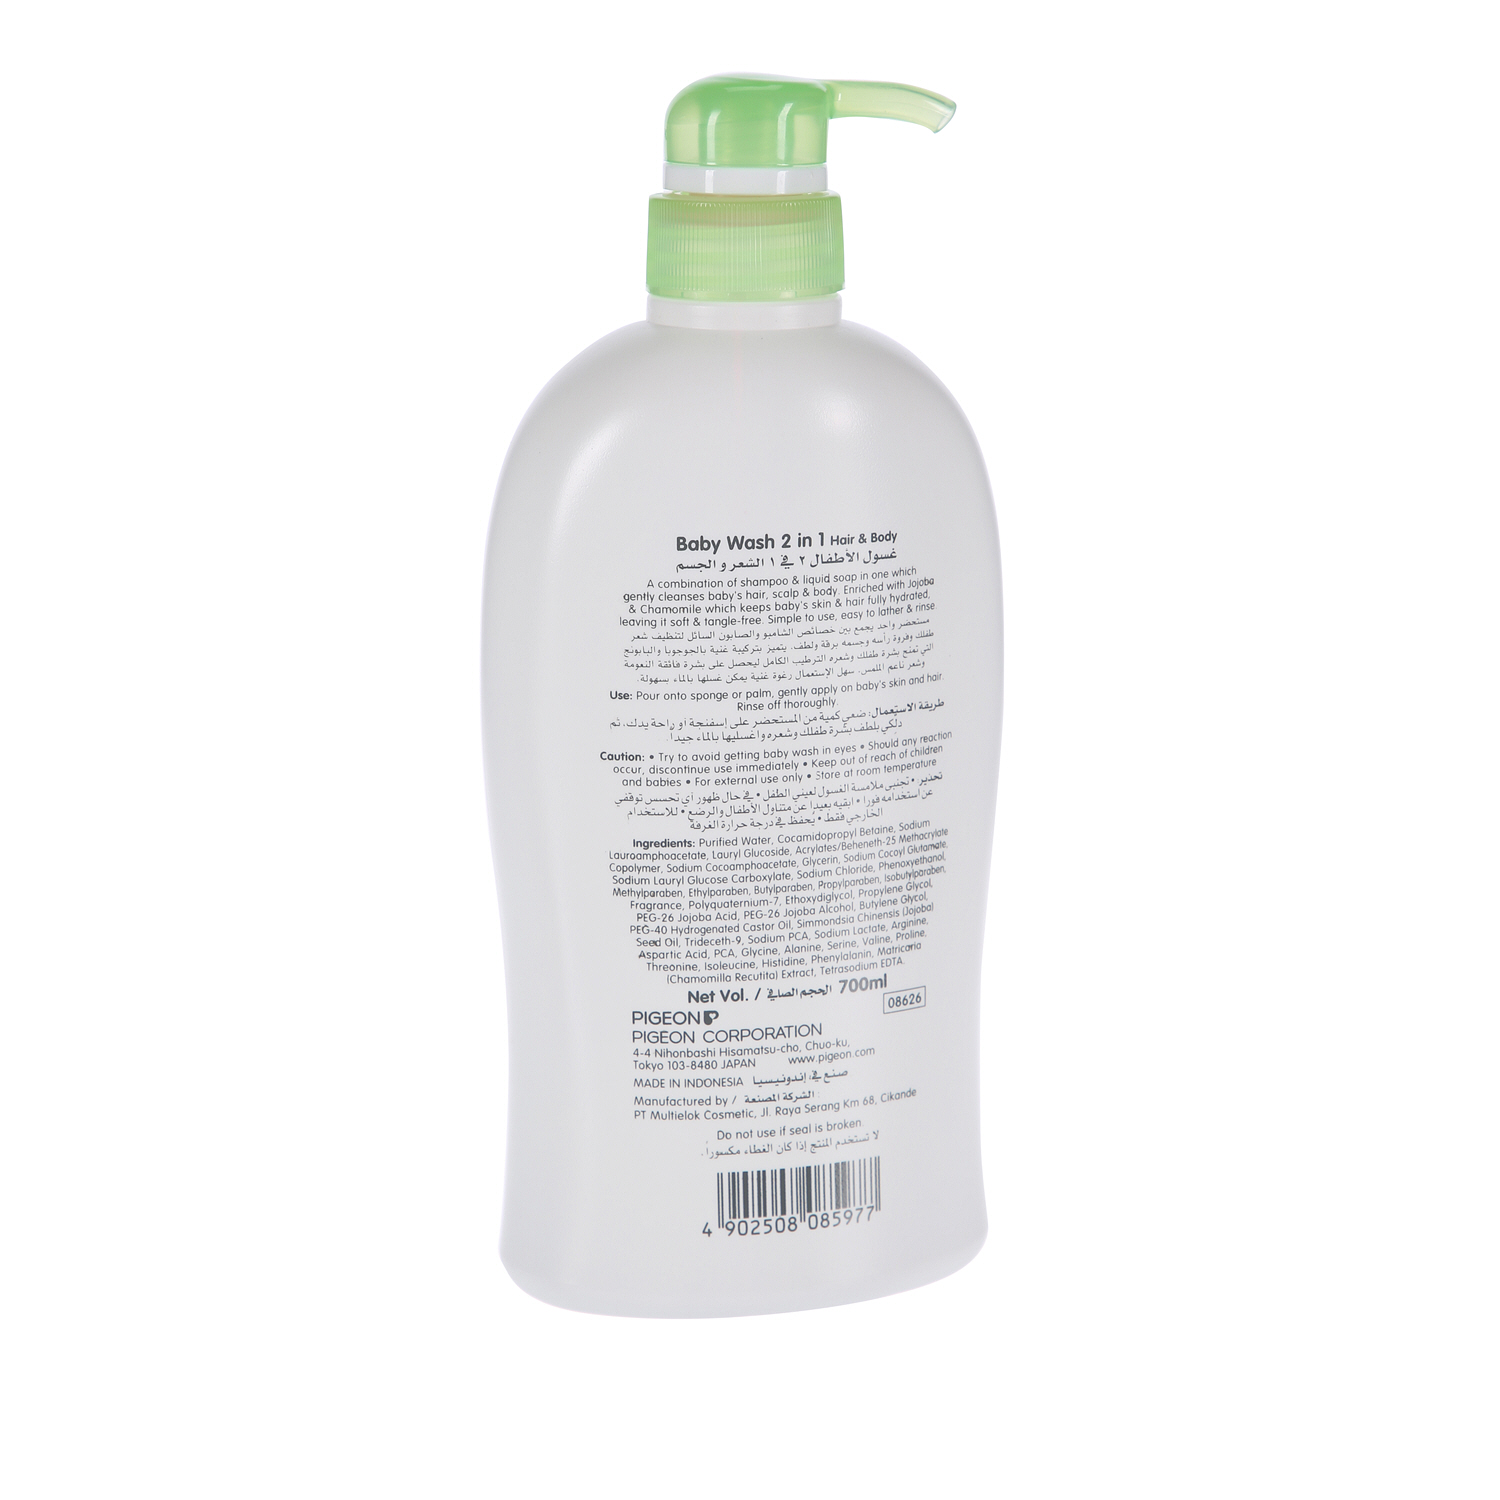 Pigeon Baby Wash 2 In 1 Hair And Body 700 ml